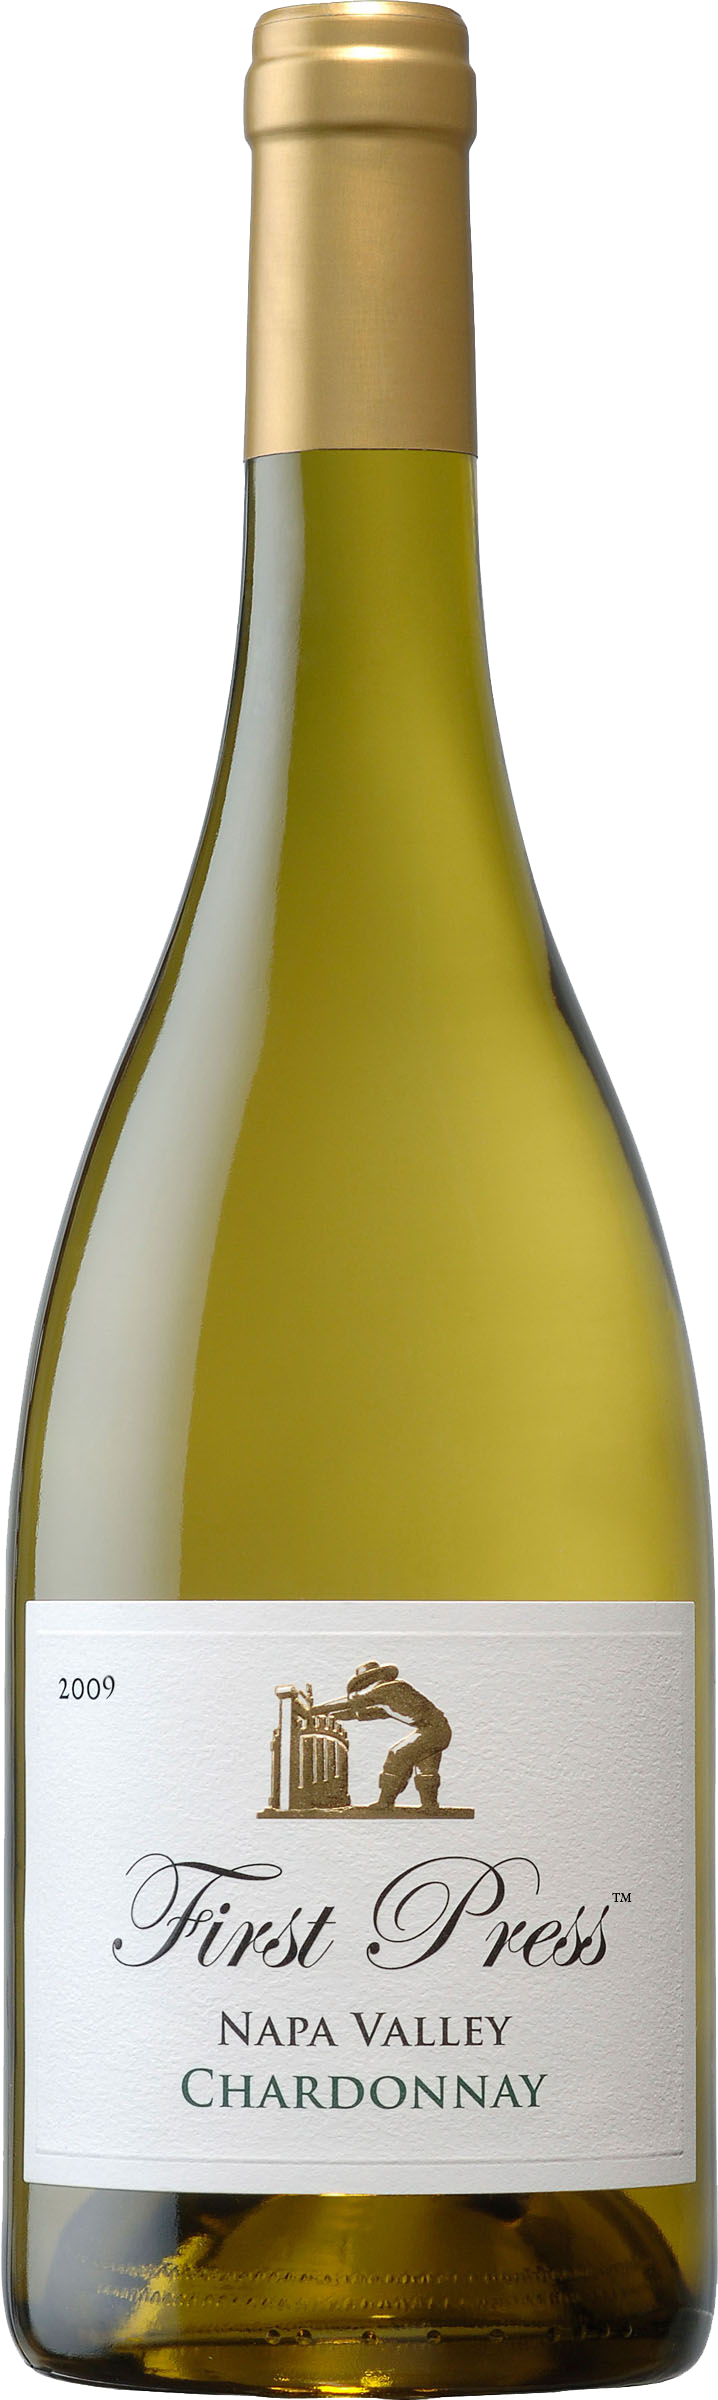 Images free download image. White wine bottle png